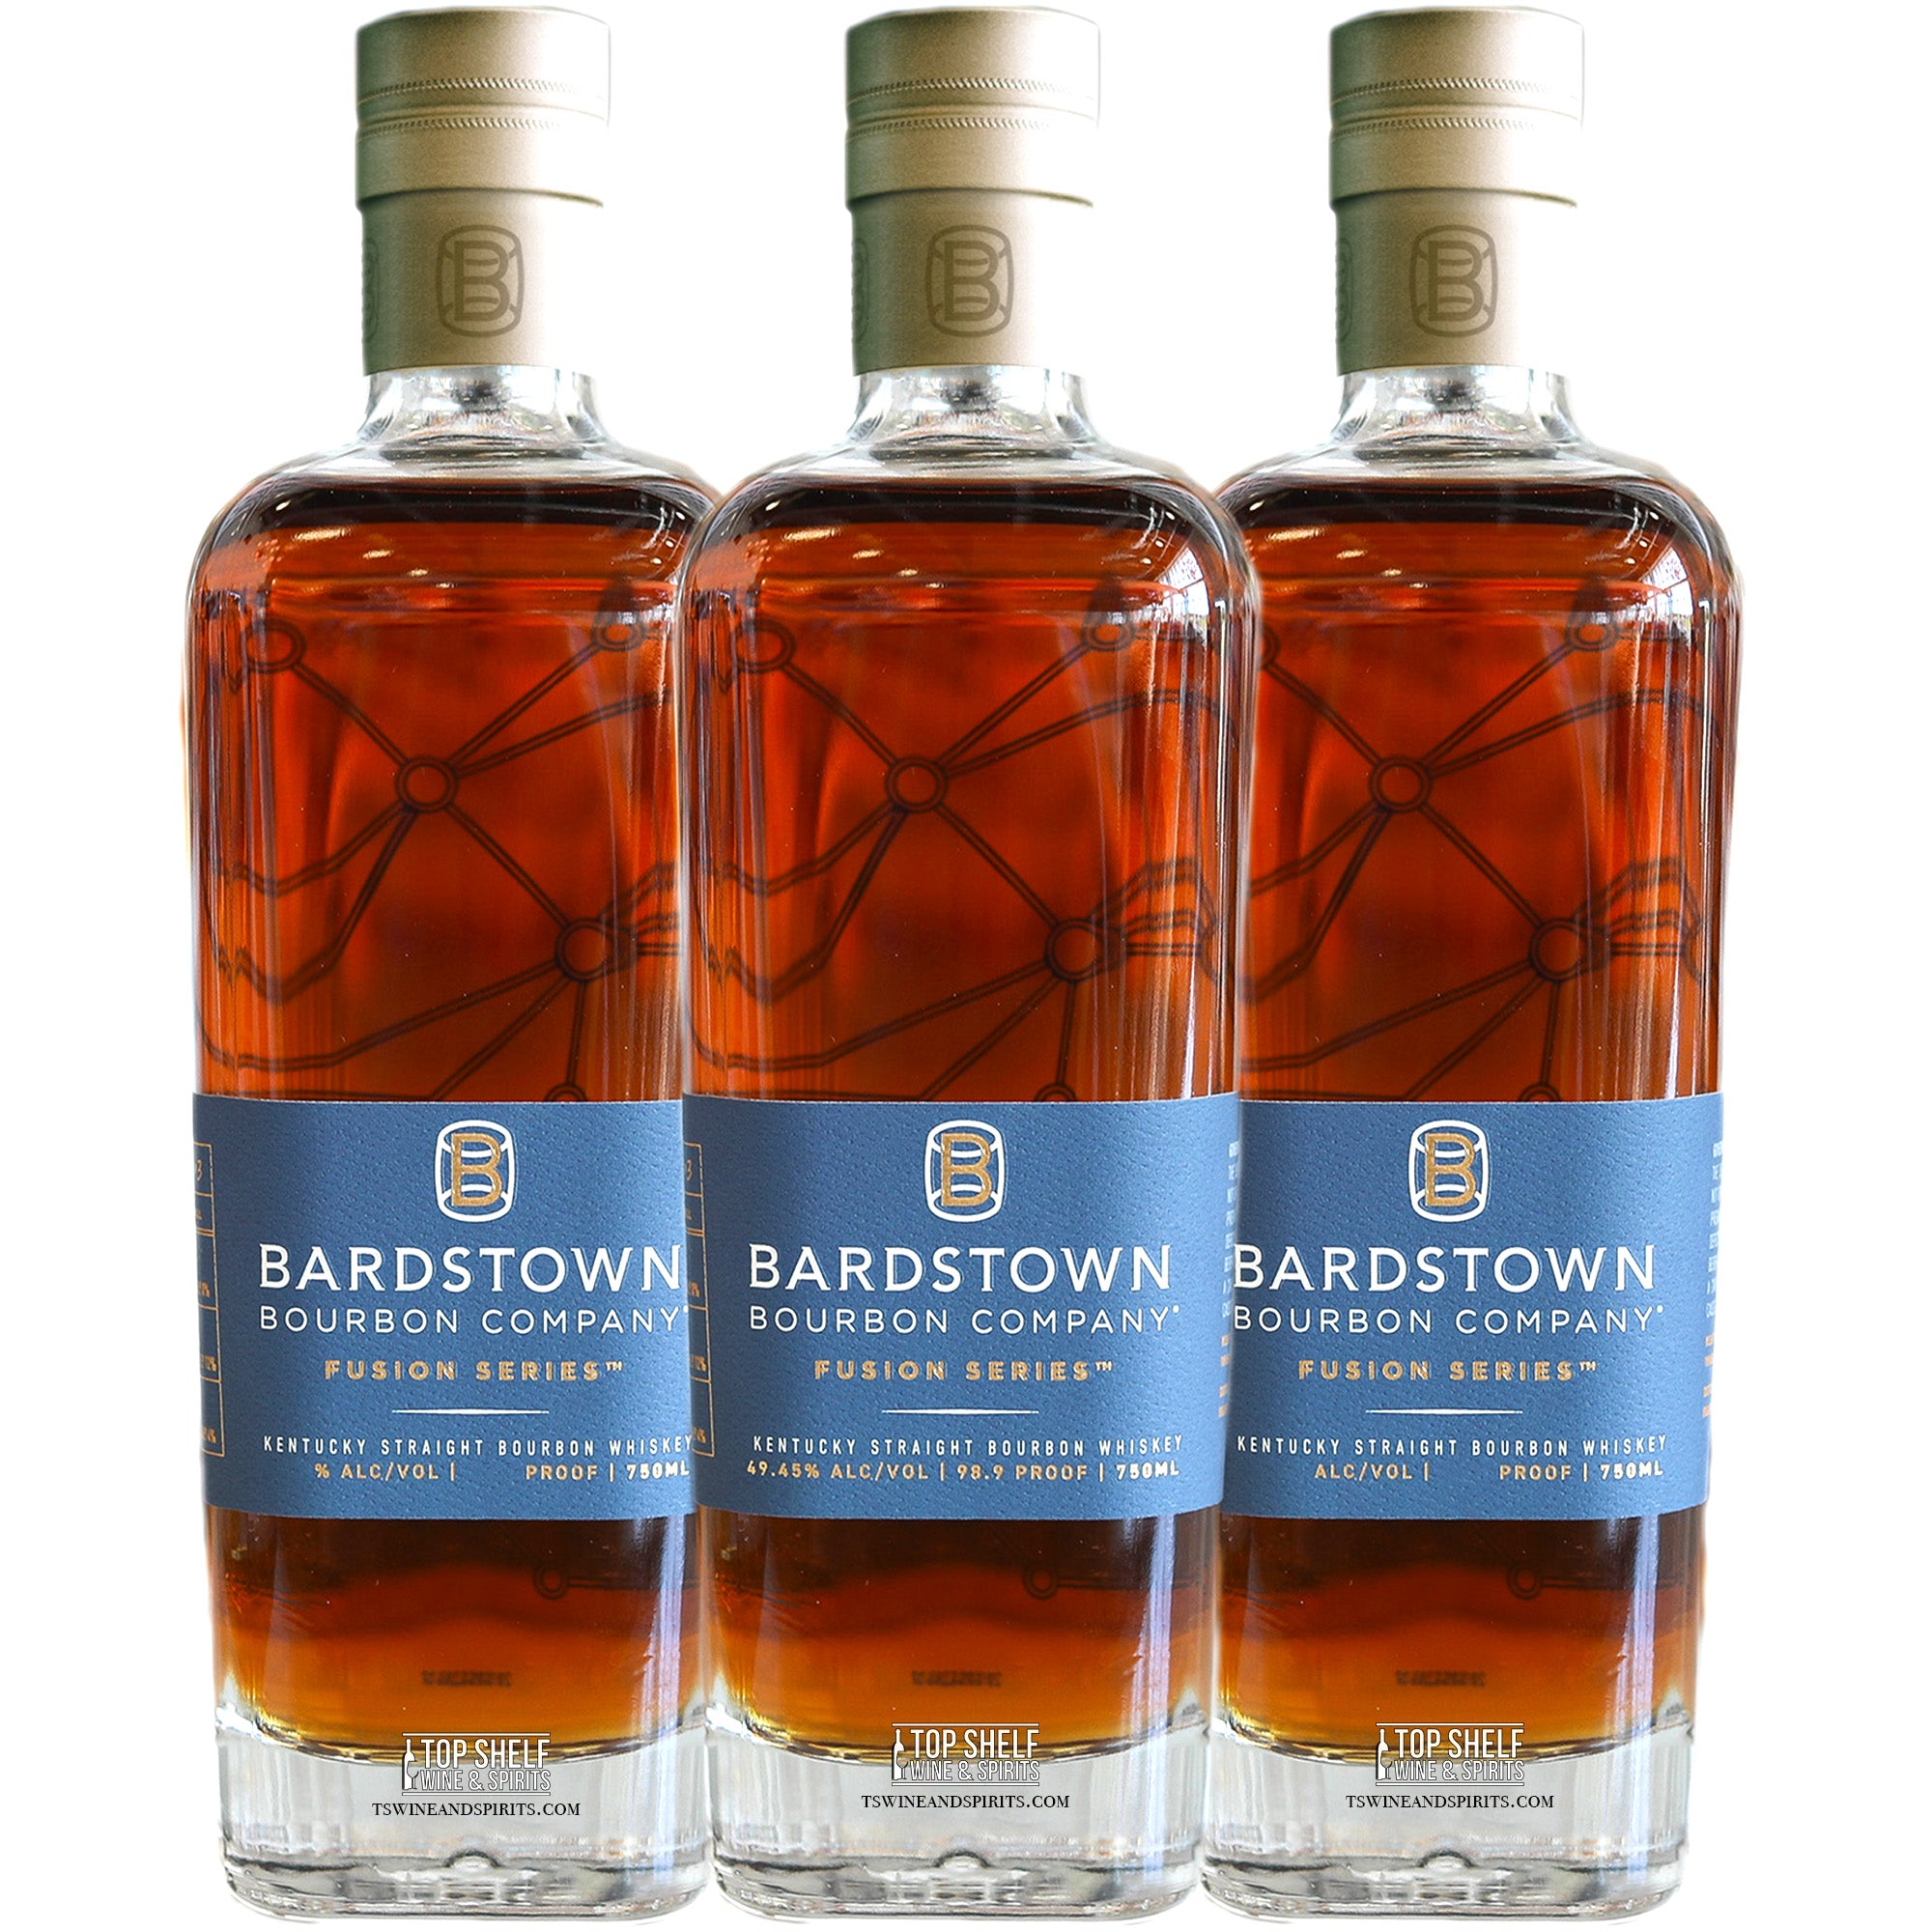 Bardstown Bourbon Company Fusion Series Top Shelf Collection